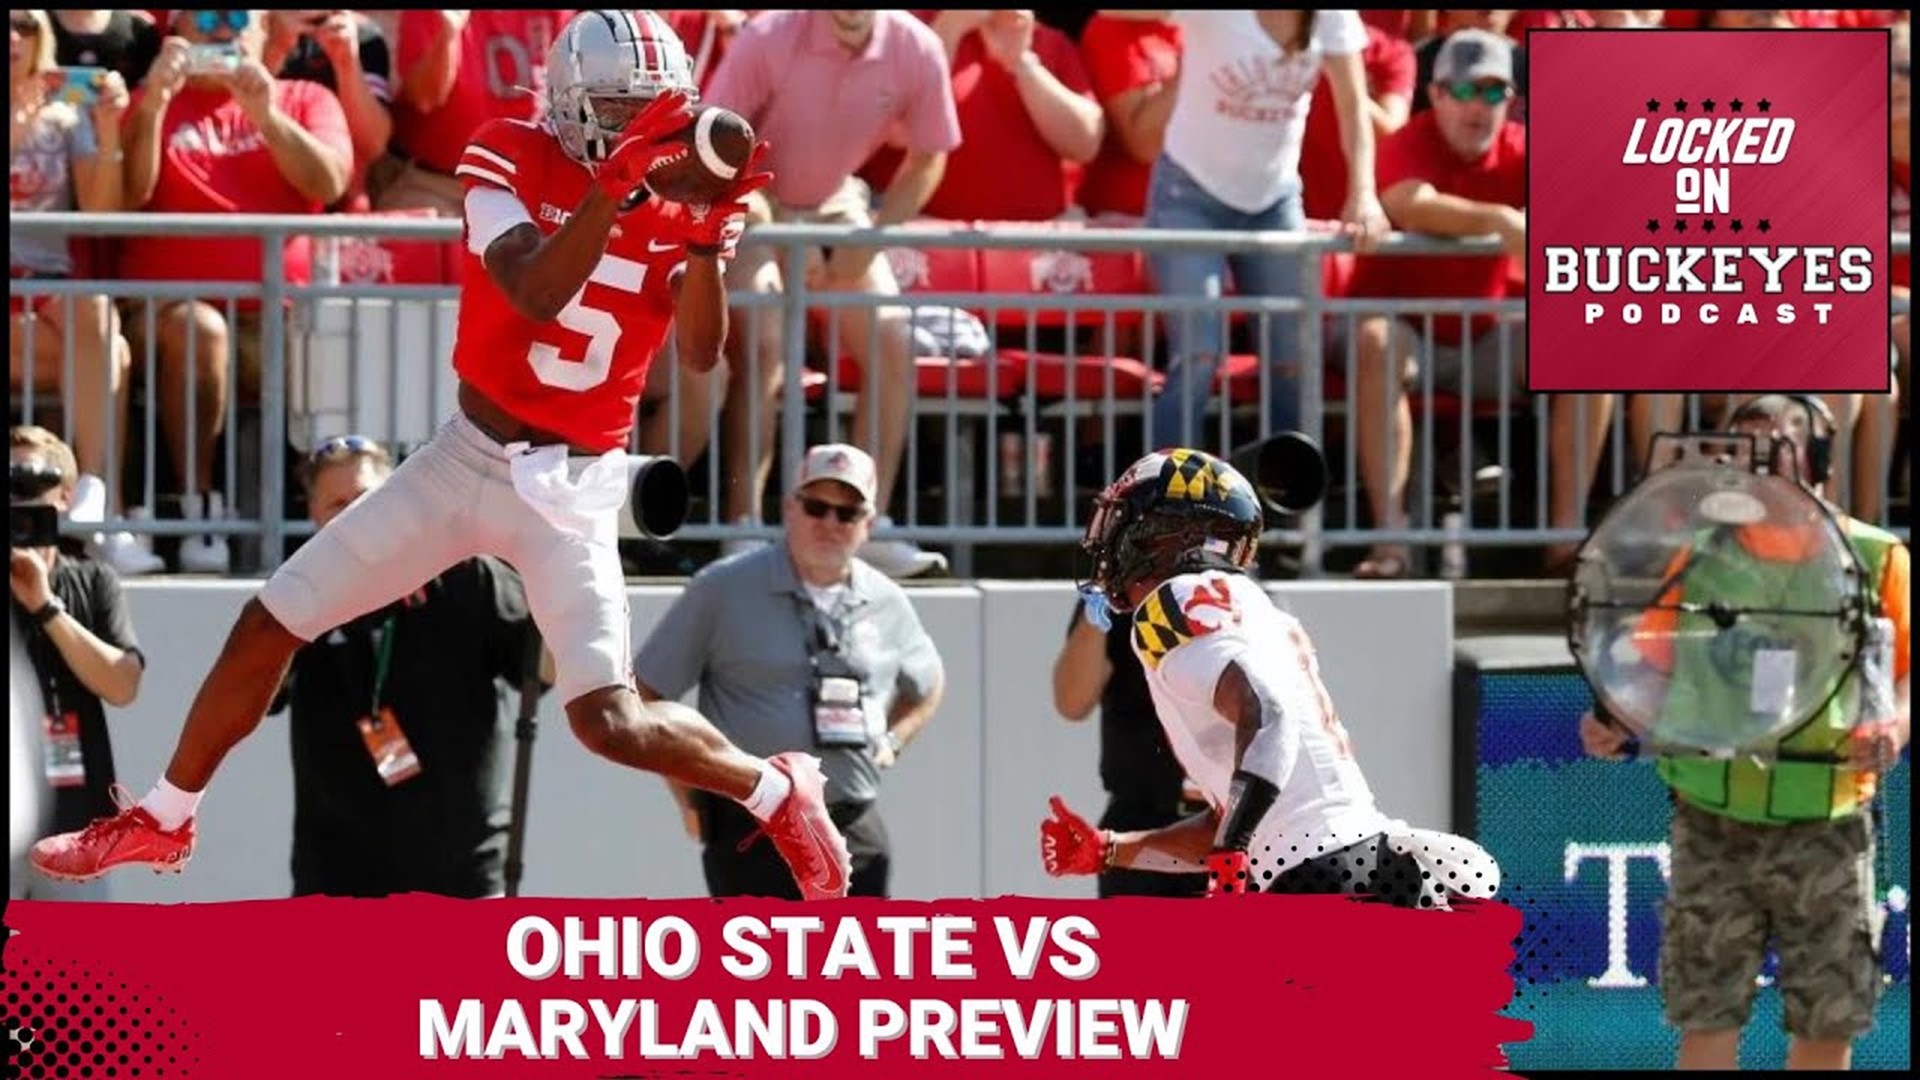 This is the perfect opportunity for the Buckeyes to perfect a few of the areas of concern within the team.